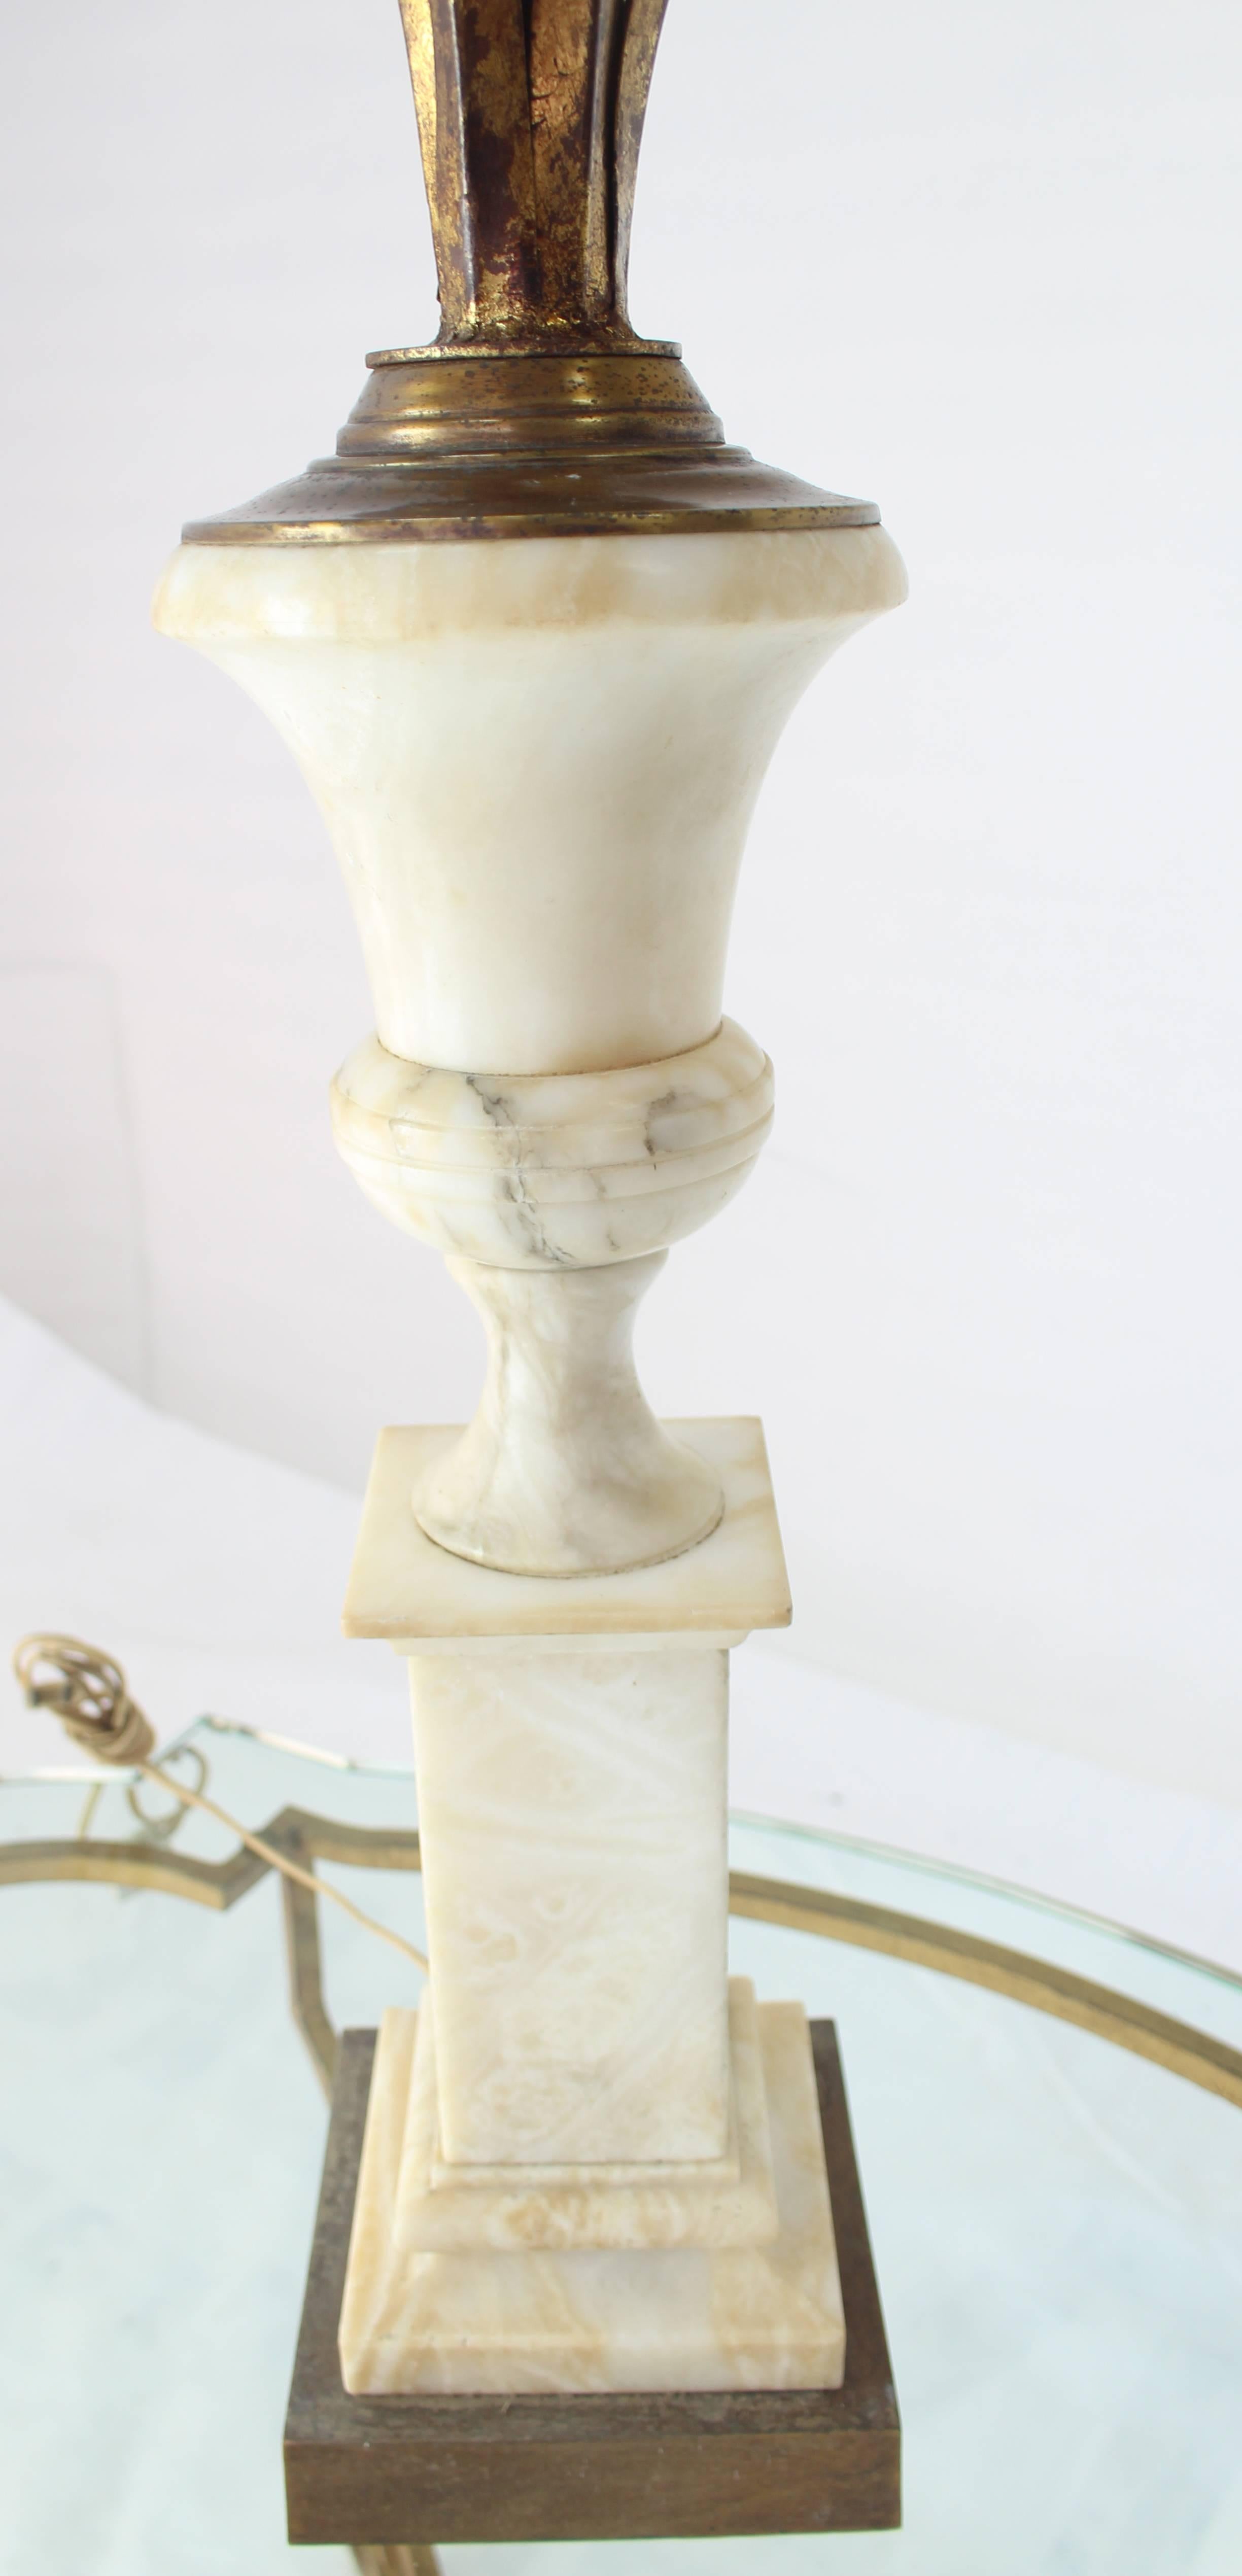 Decorative well built heavy and steady marble base table lamp. Coco Chanel style. Mid-Century Modern.